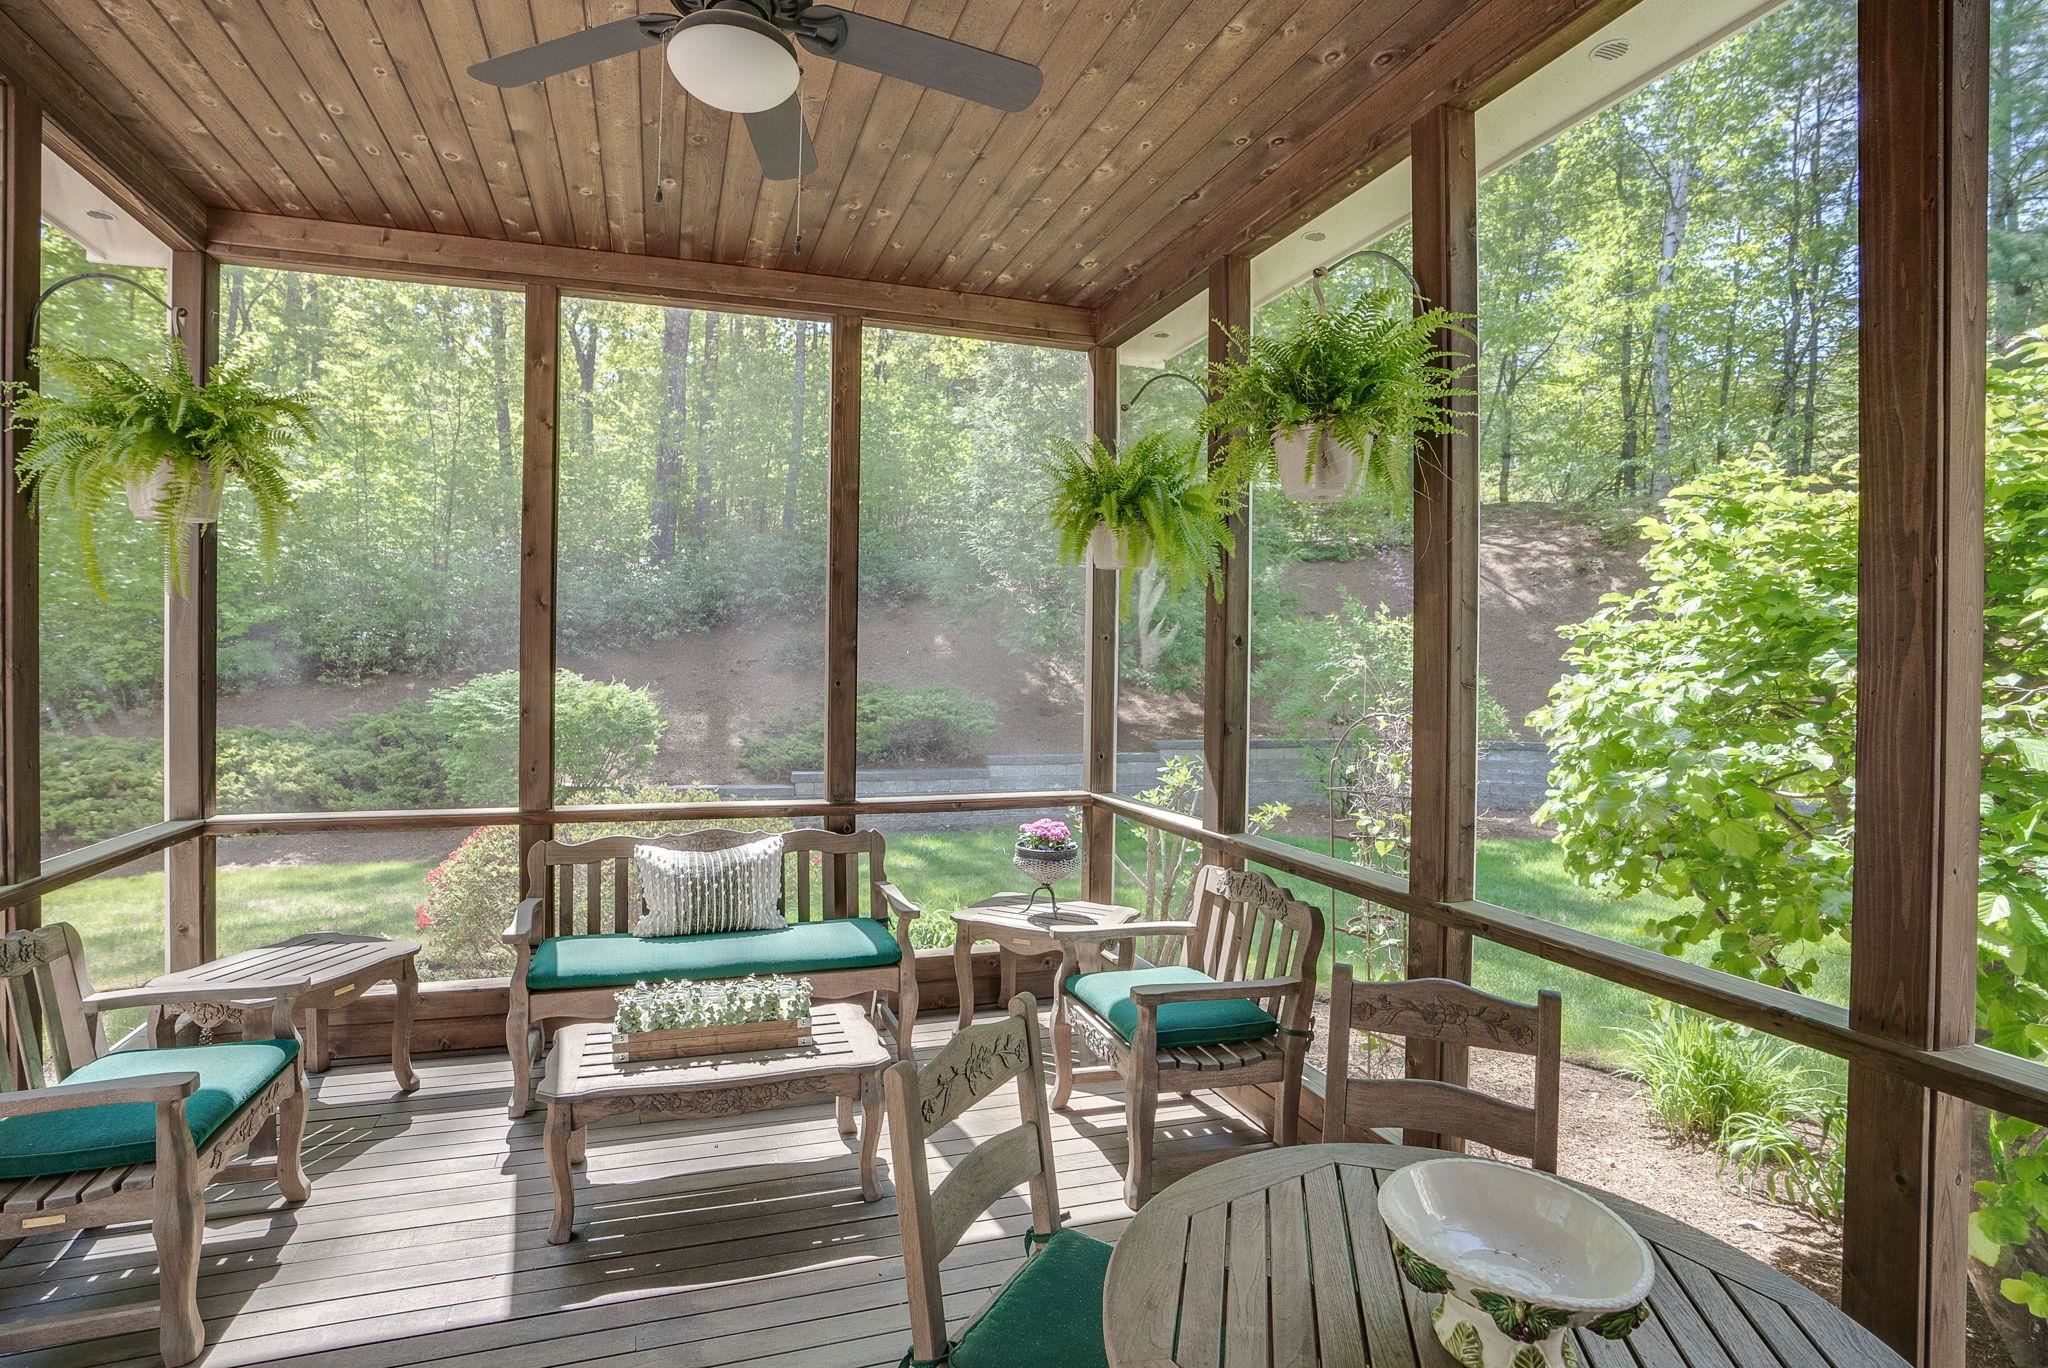 Enjoy the Sounds of Nature in the Screen Porch